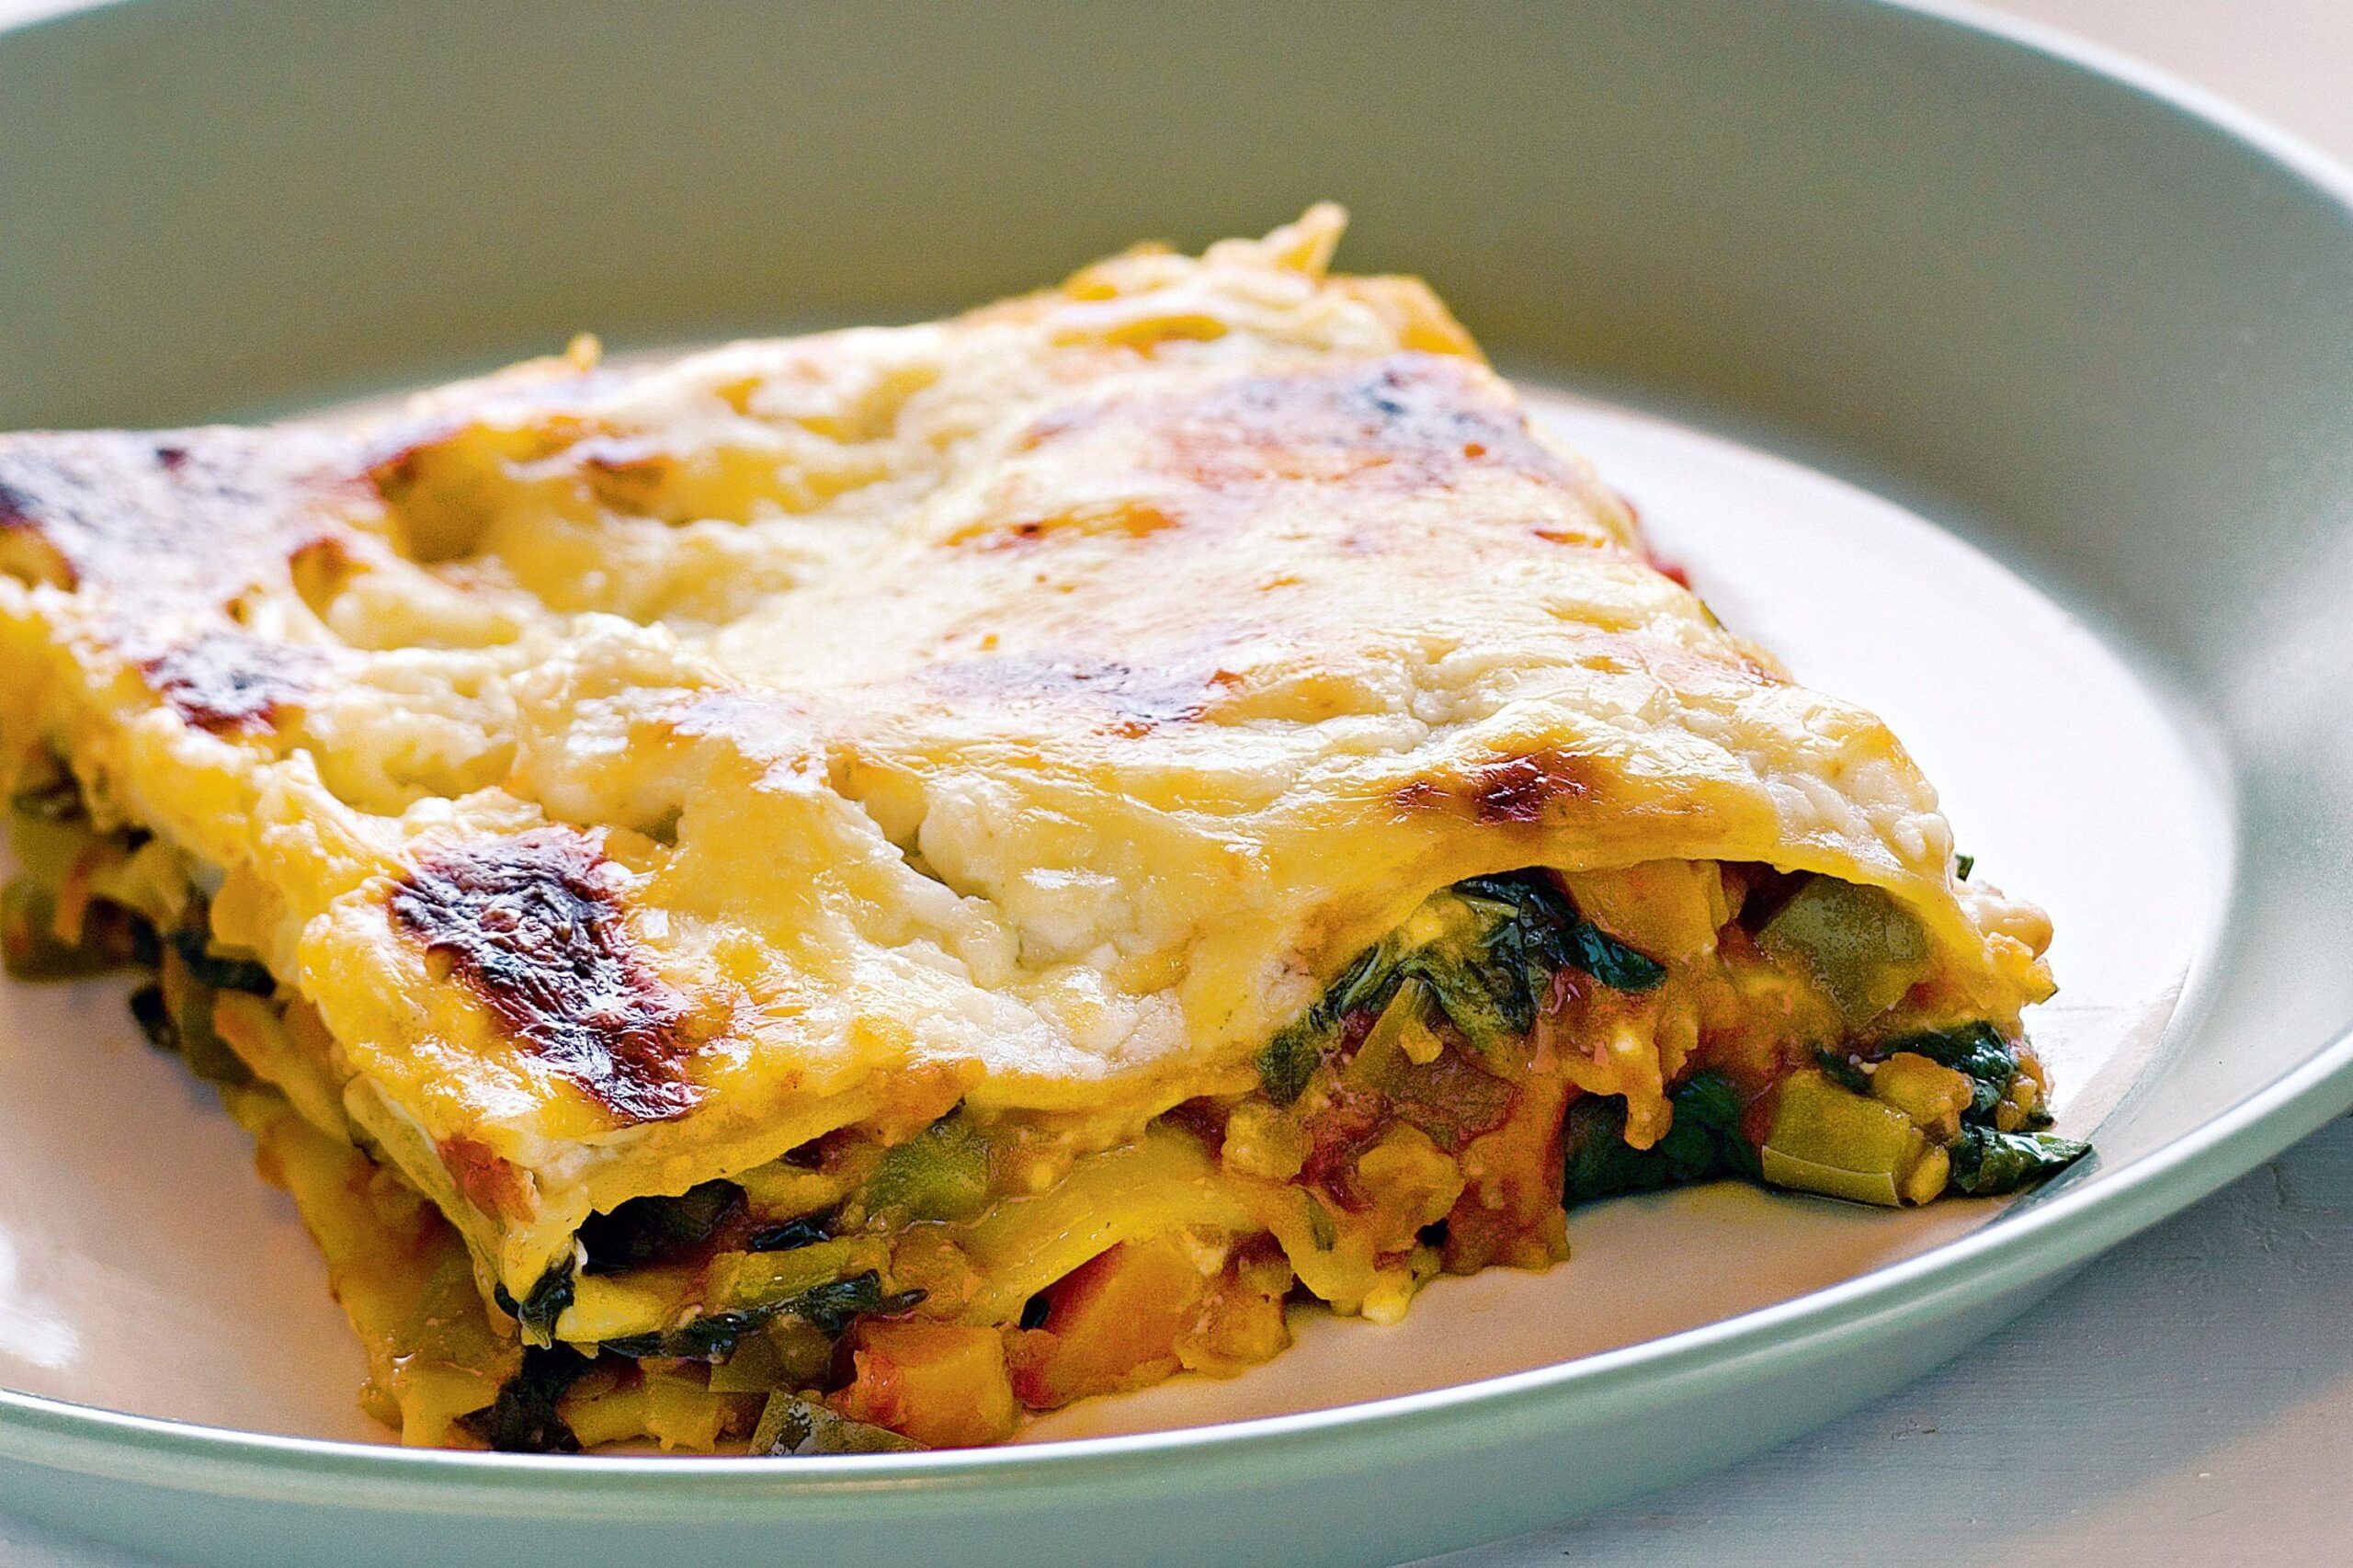  Don't let the vegetarian label fool you; this spinach and lentil lasagna packs a flavor punch.